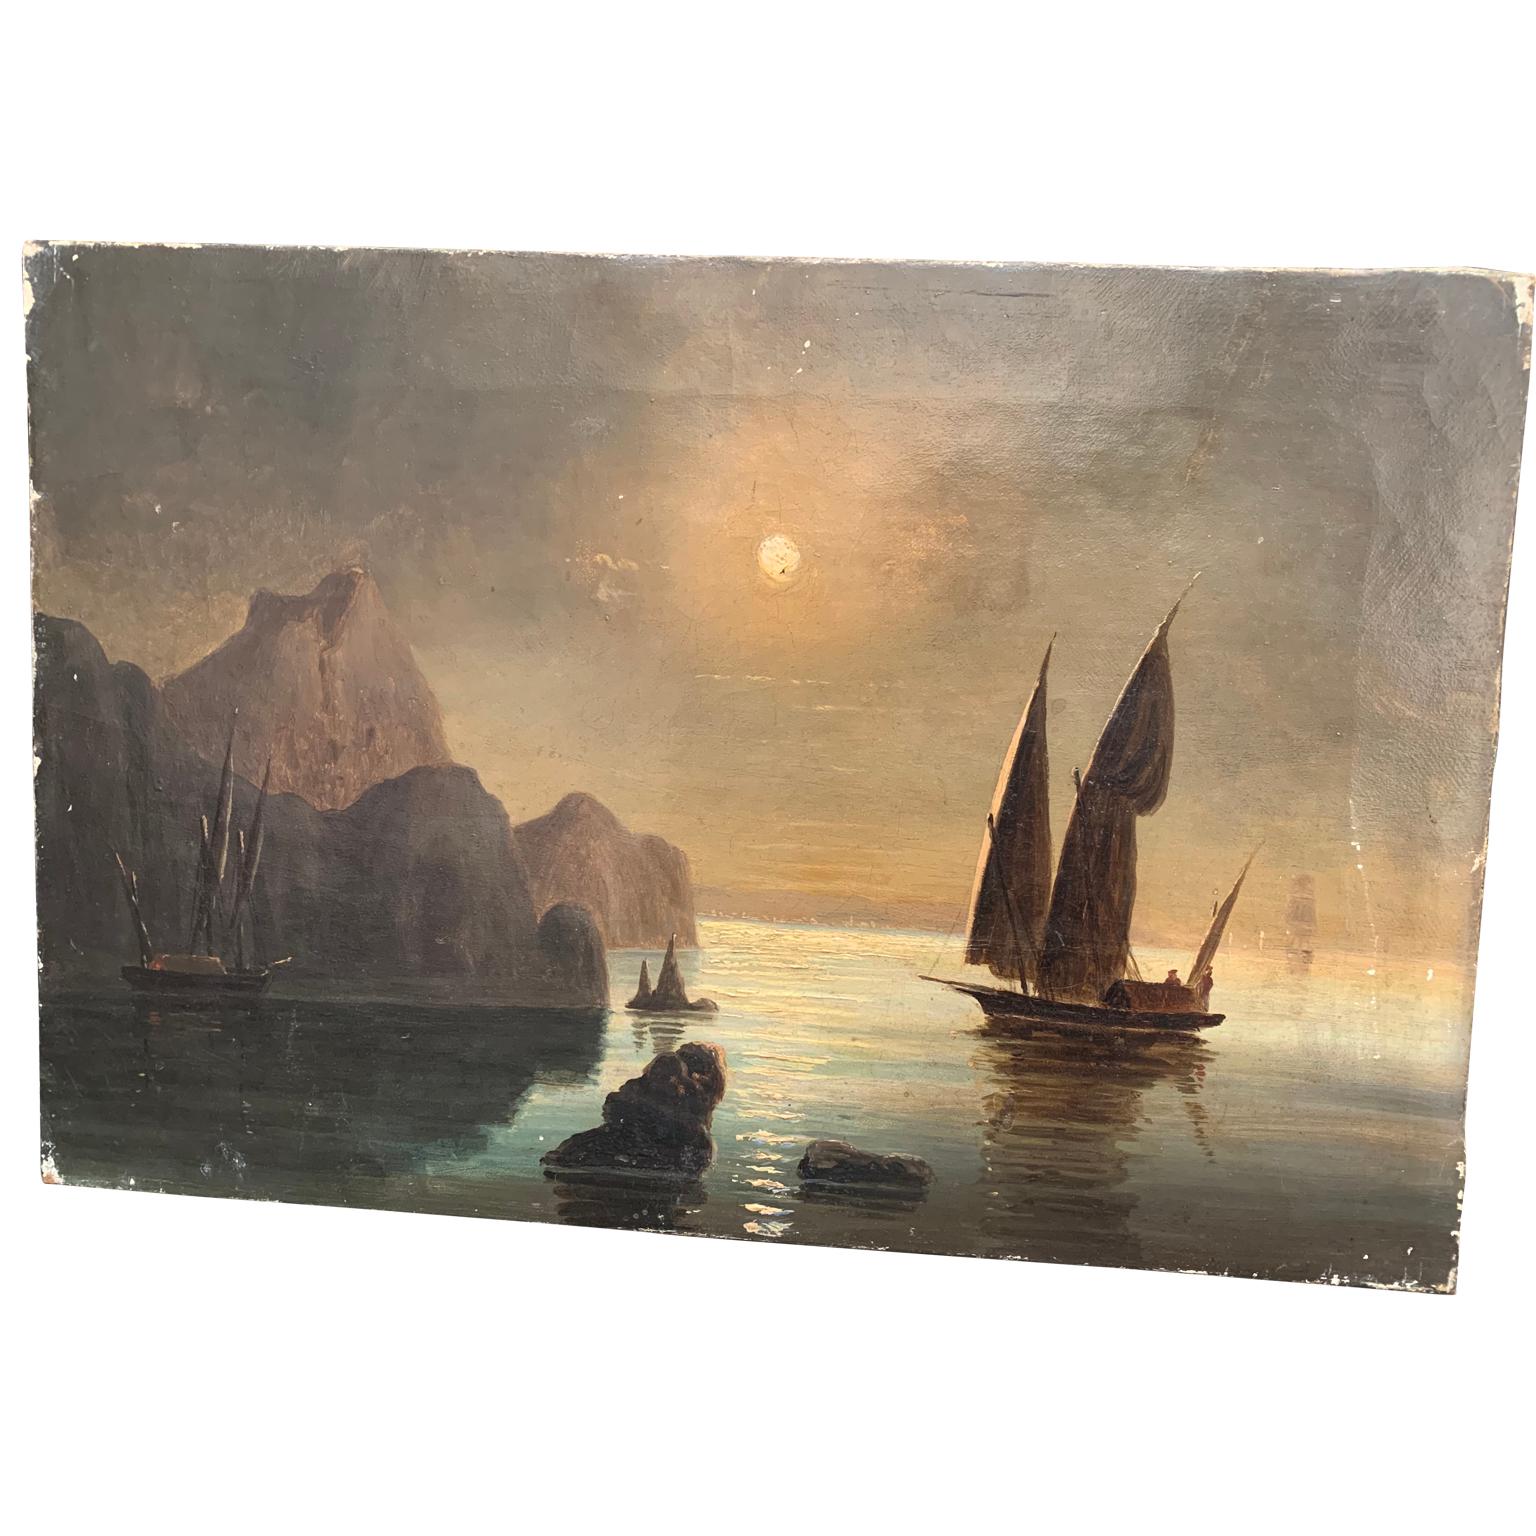 19th century oil painting of Swedish coastline with sail boat in moonlight.
This artwork has small damages but has also kept its original patina and feeling trough the decades which is something both us and our customers dearly appreciate when it